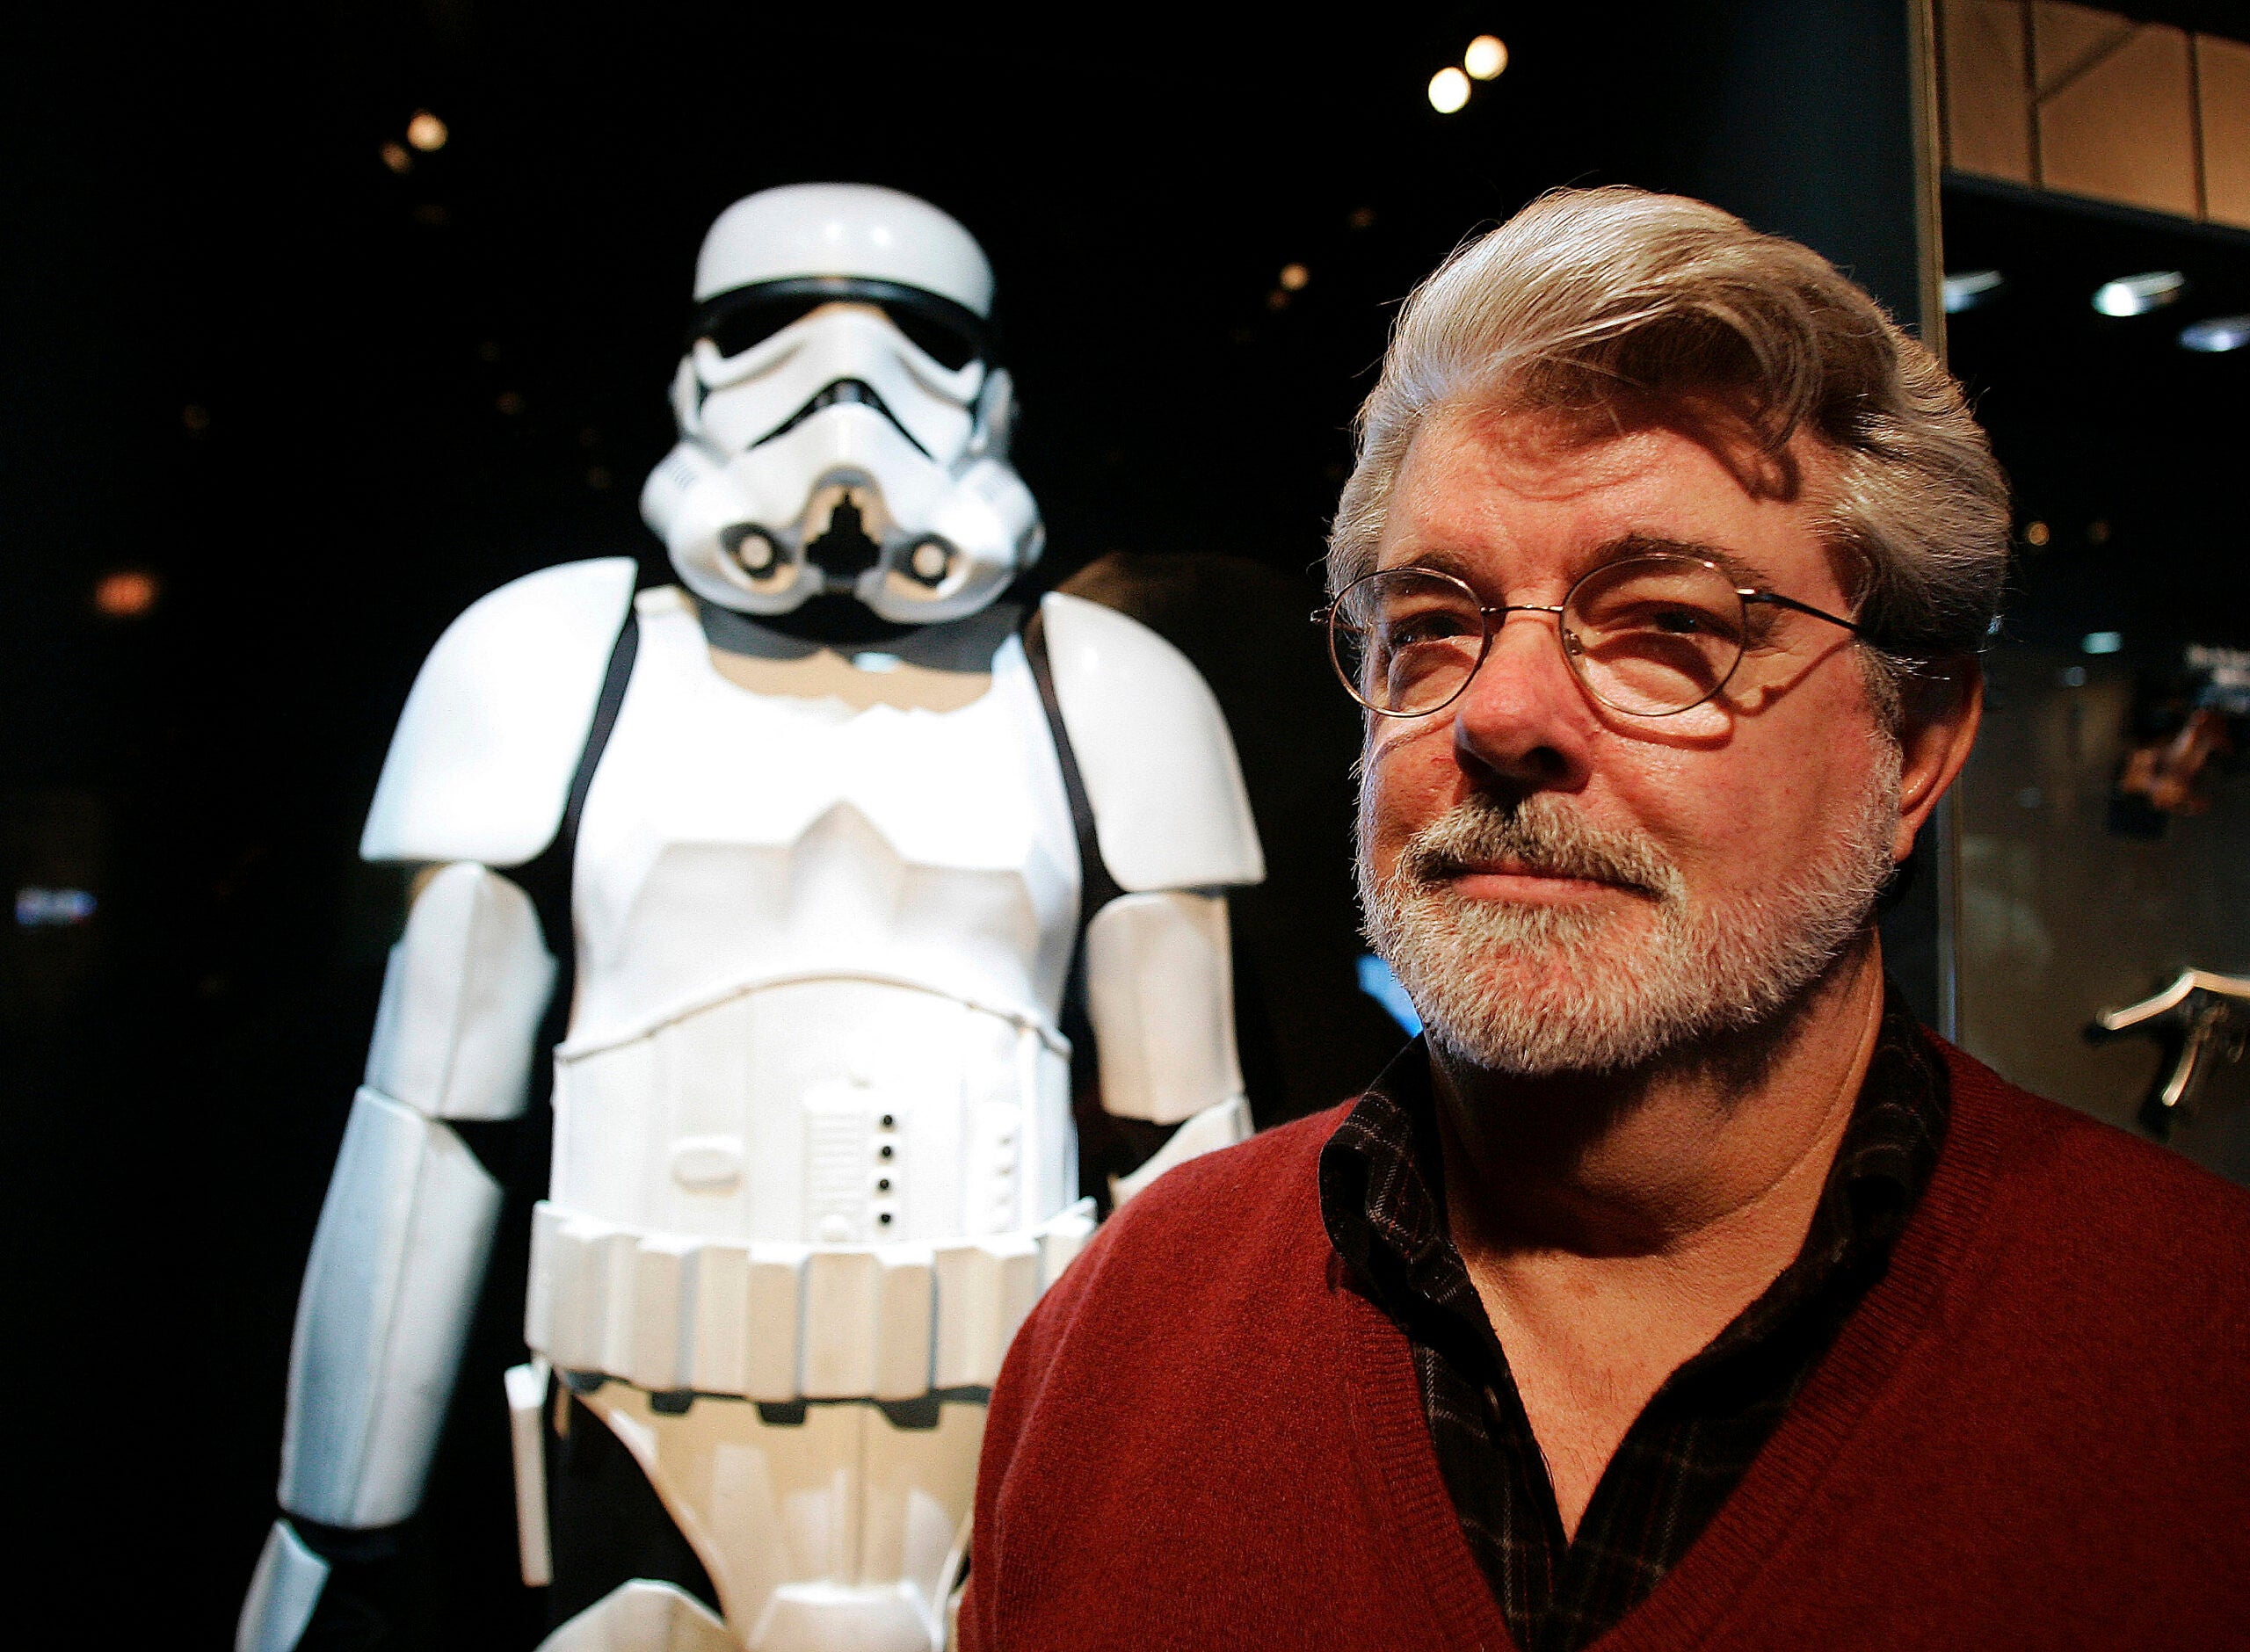 It’s time for stormtroopers to have a gritty ‘Star Wars’ movie of their own